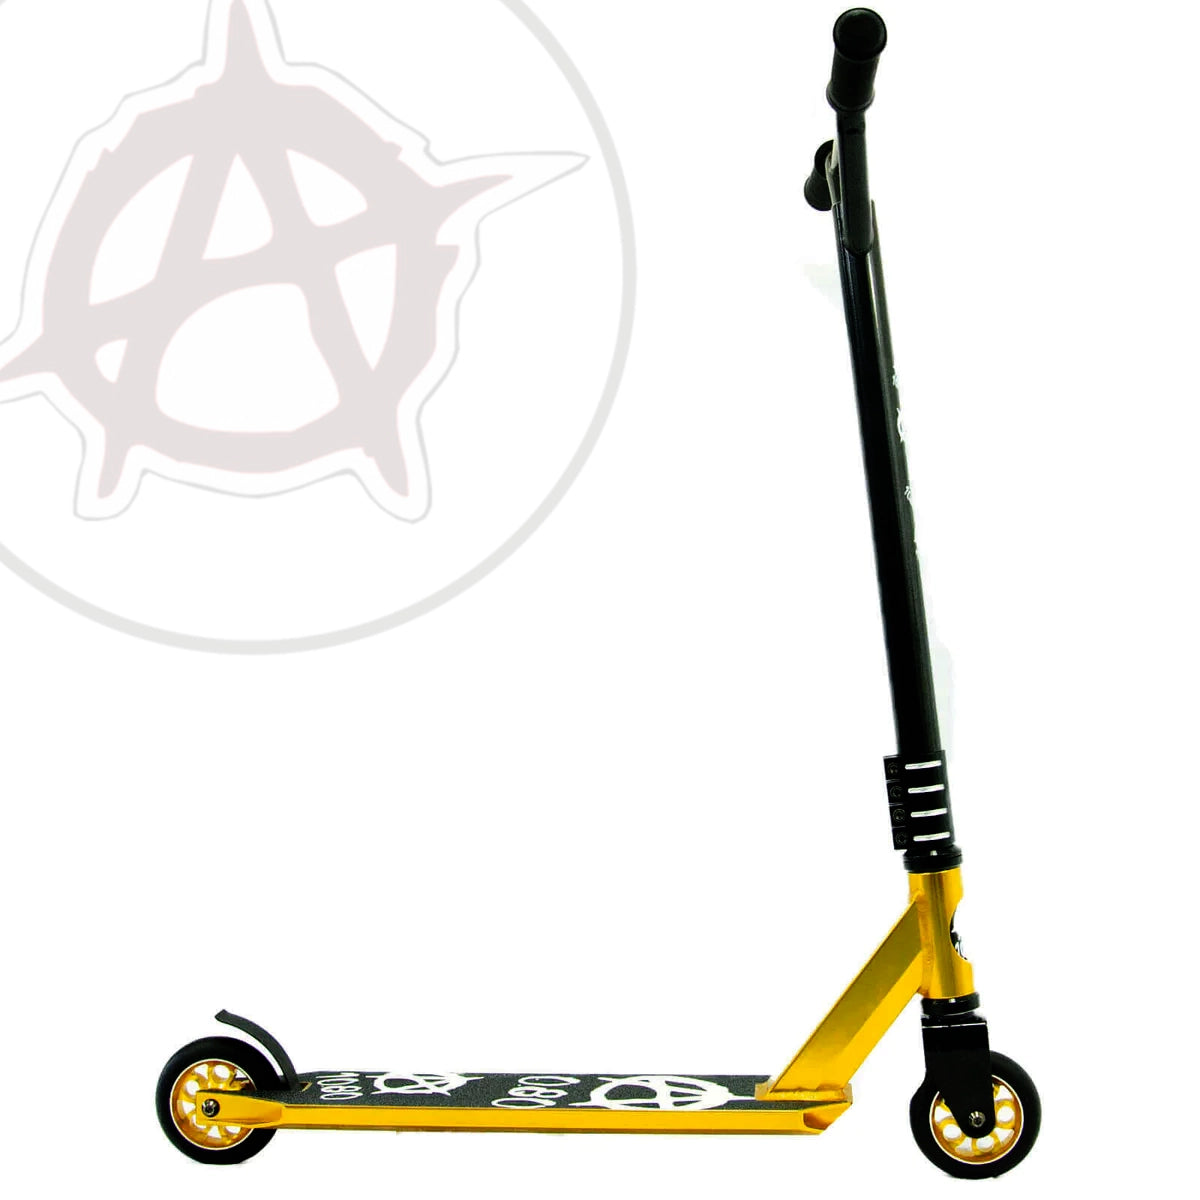 1080 Pro Stunt Scooter - Ano Gold